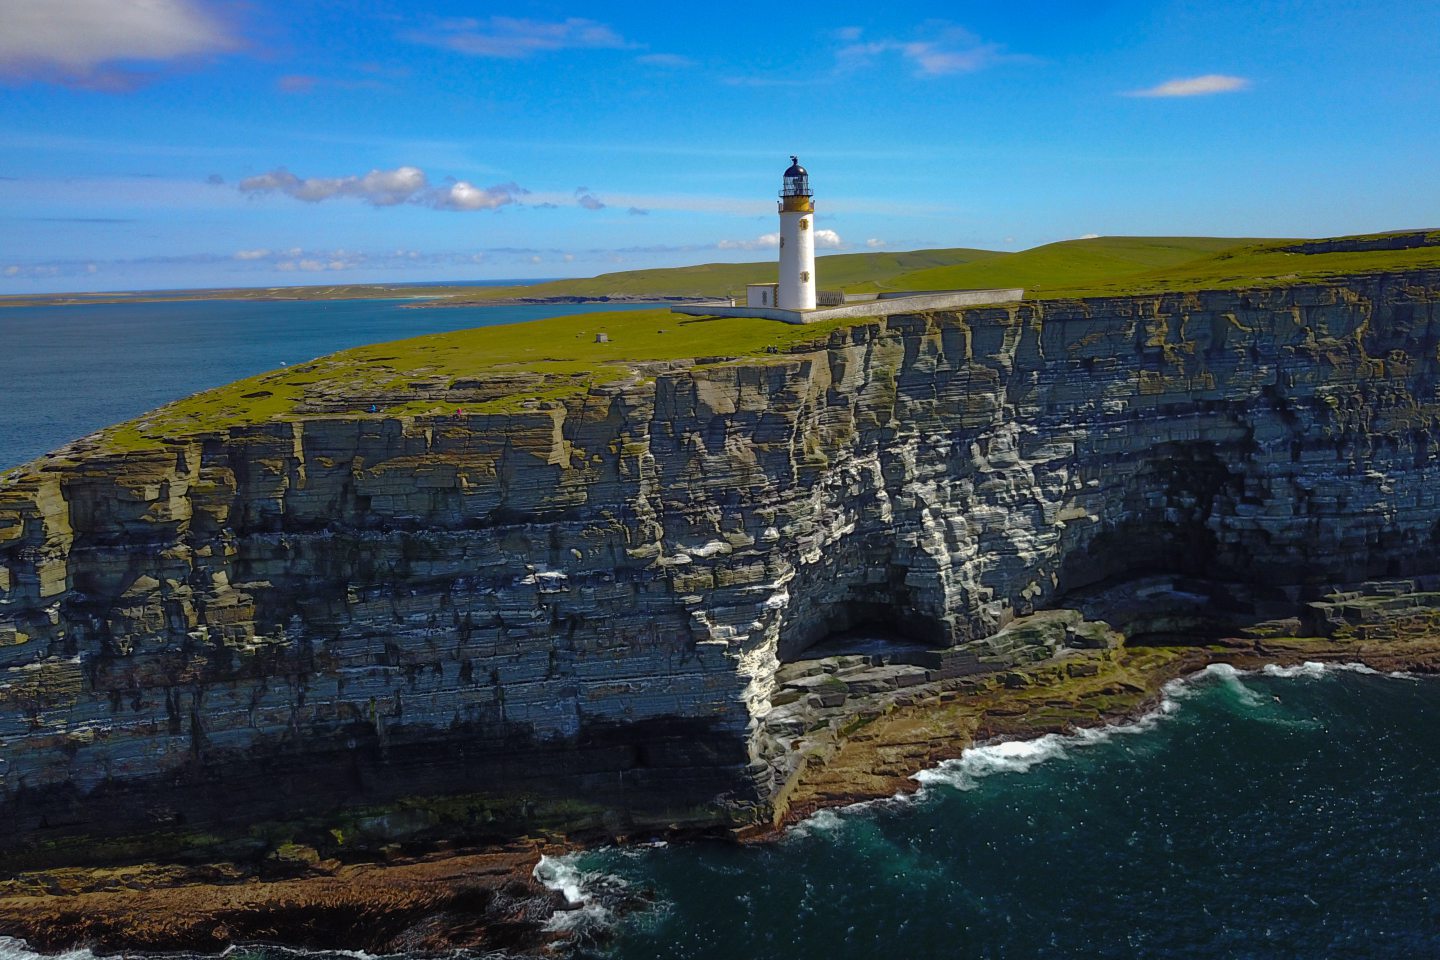 Noup Head lighthouse overlooks the cliffs in north-west Westray, Orkney. Image: Shutterstock / ChrisNoe